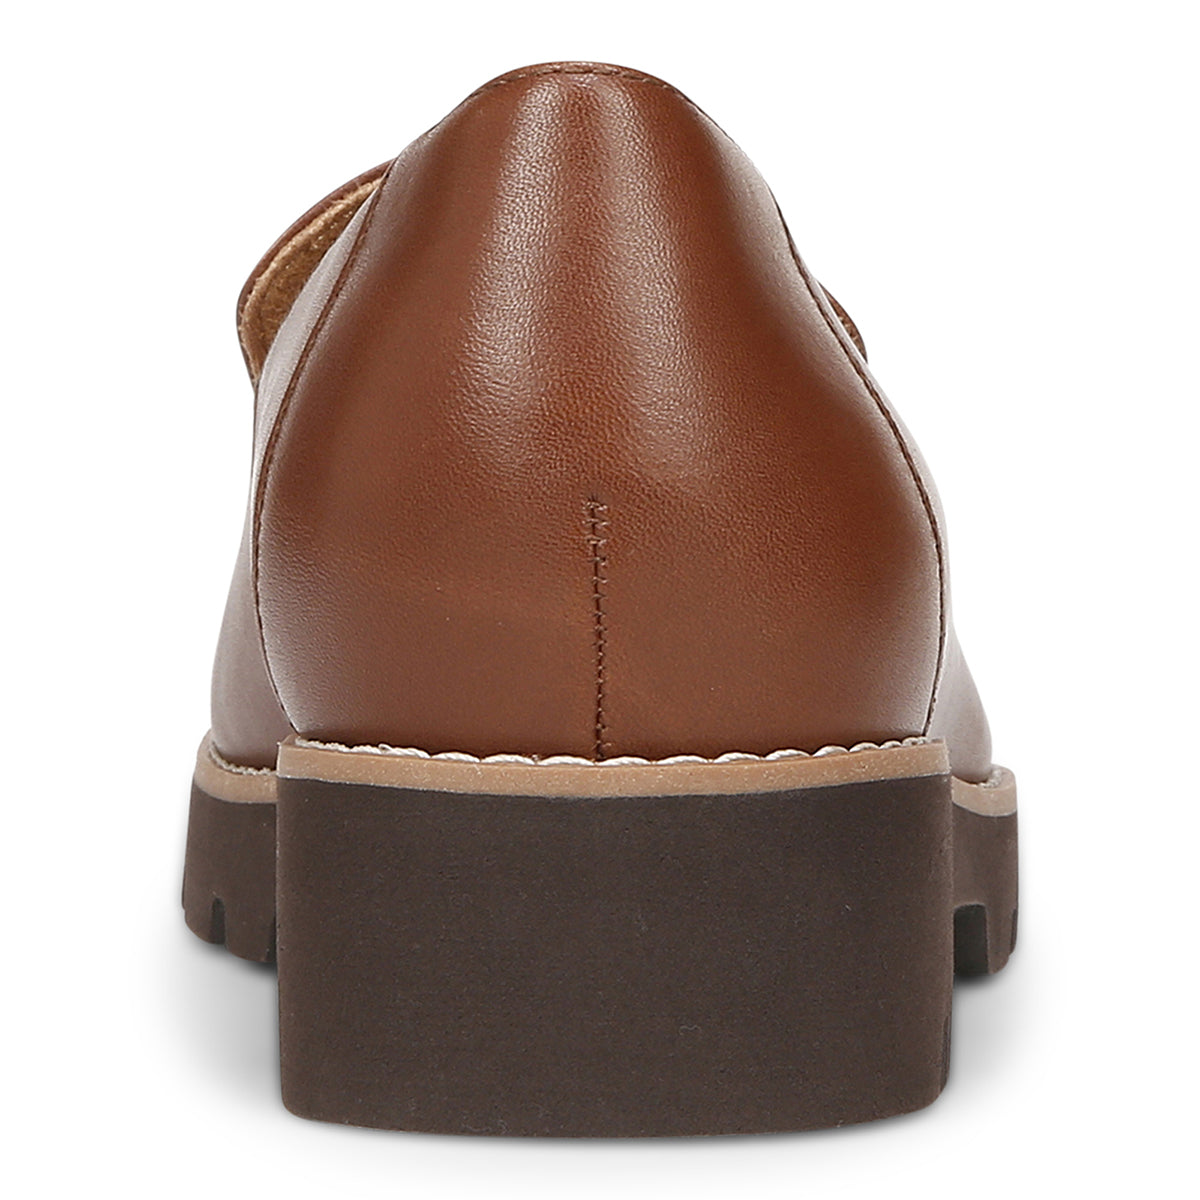 BROWN LEATHER | Rear